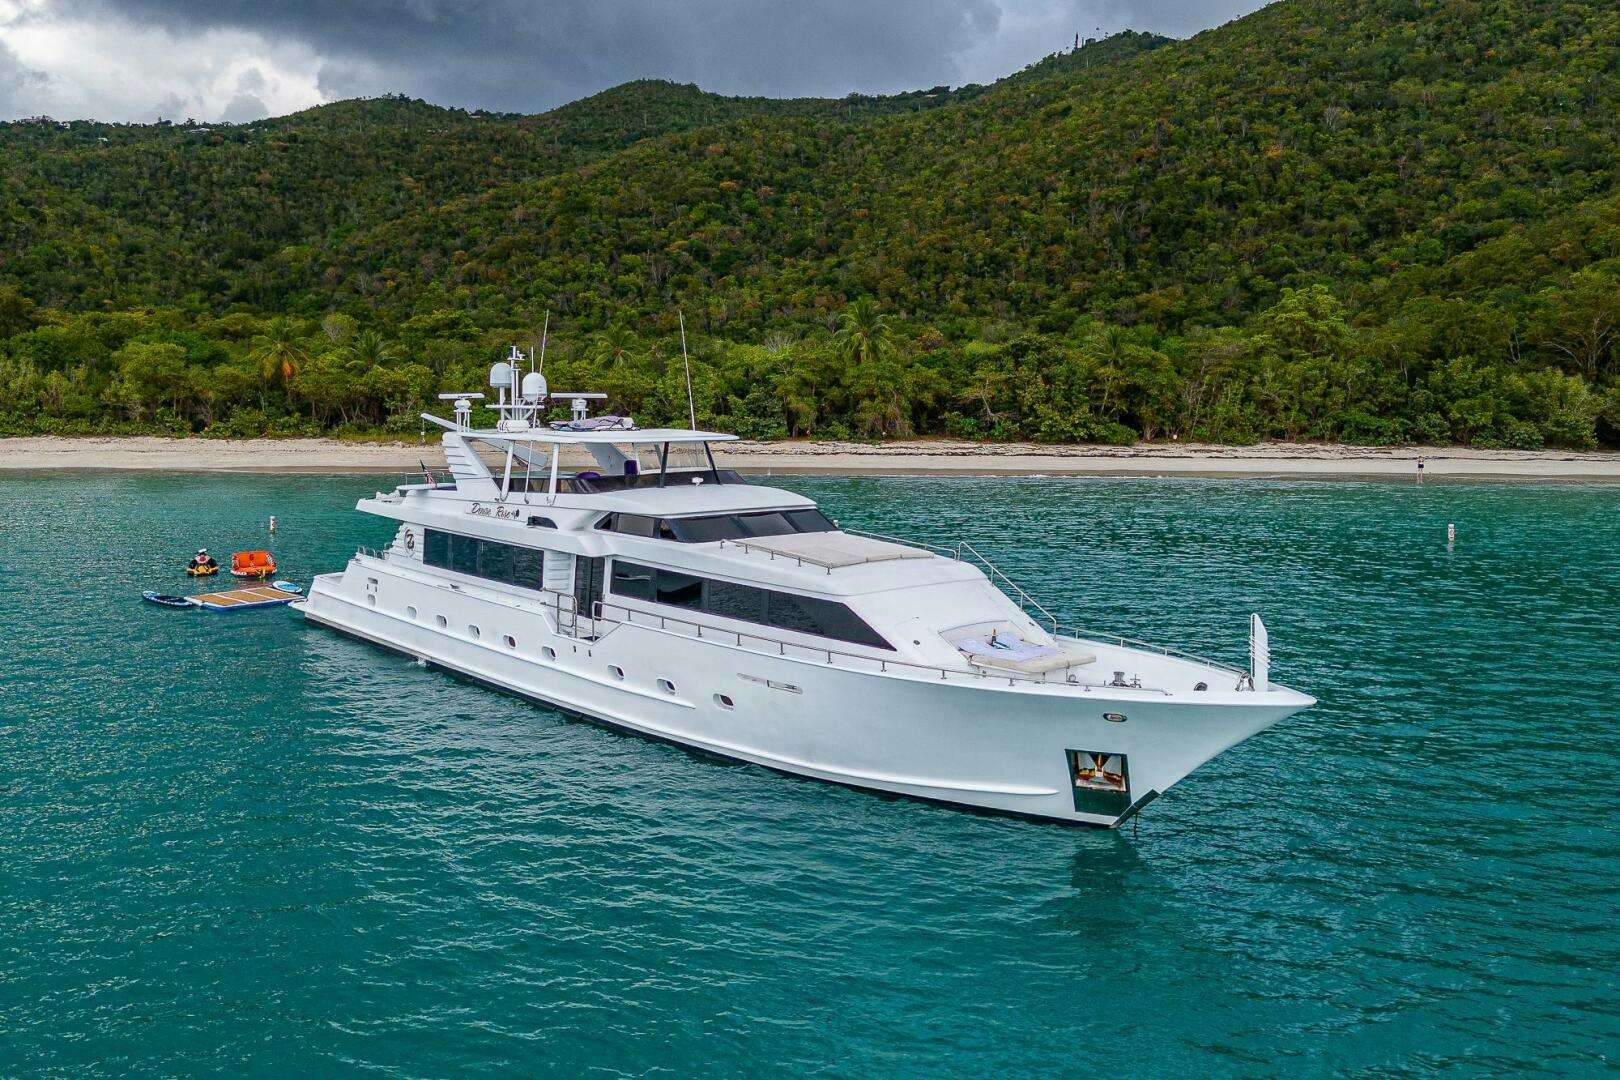 Denise rose
Yacht for Sale